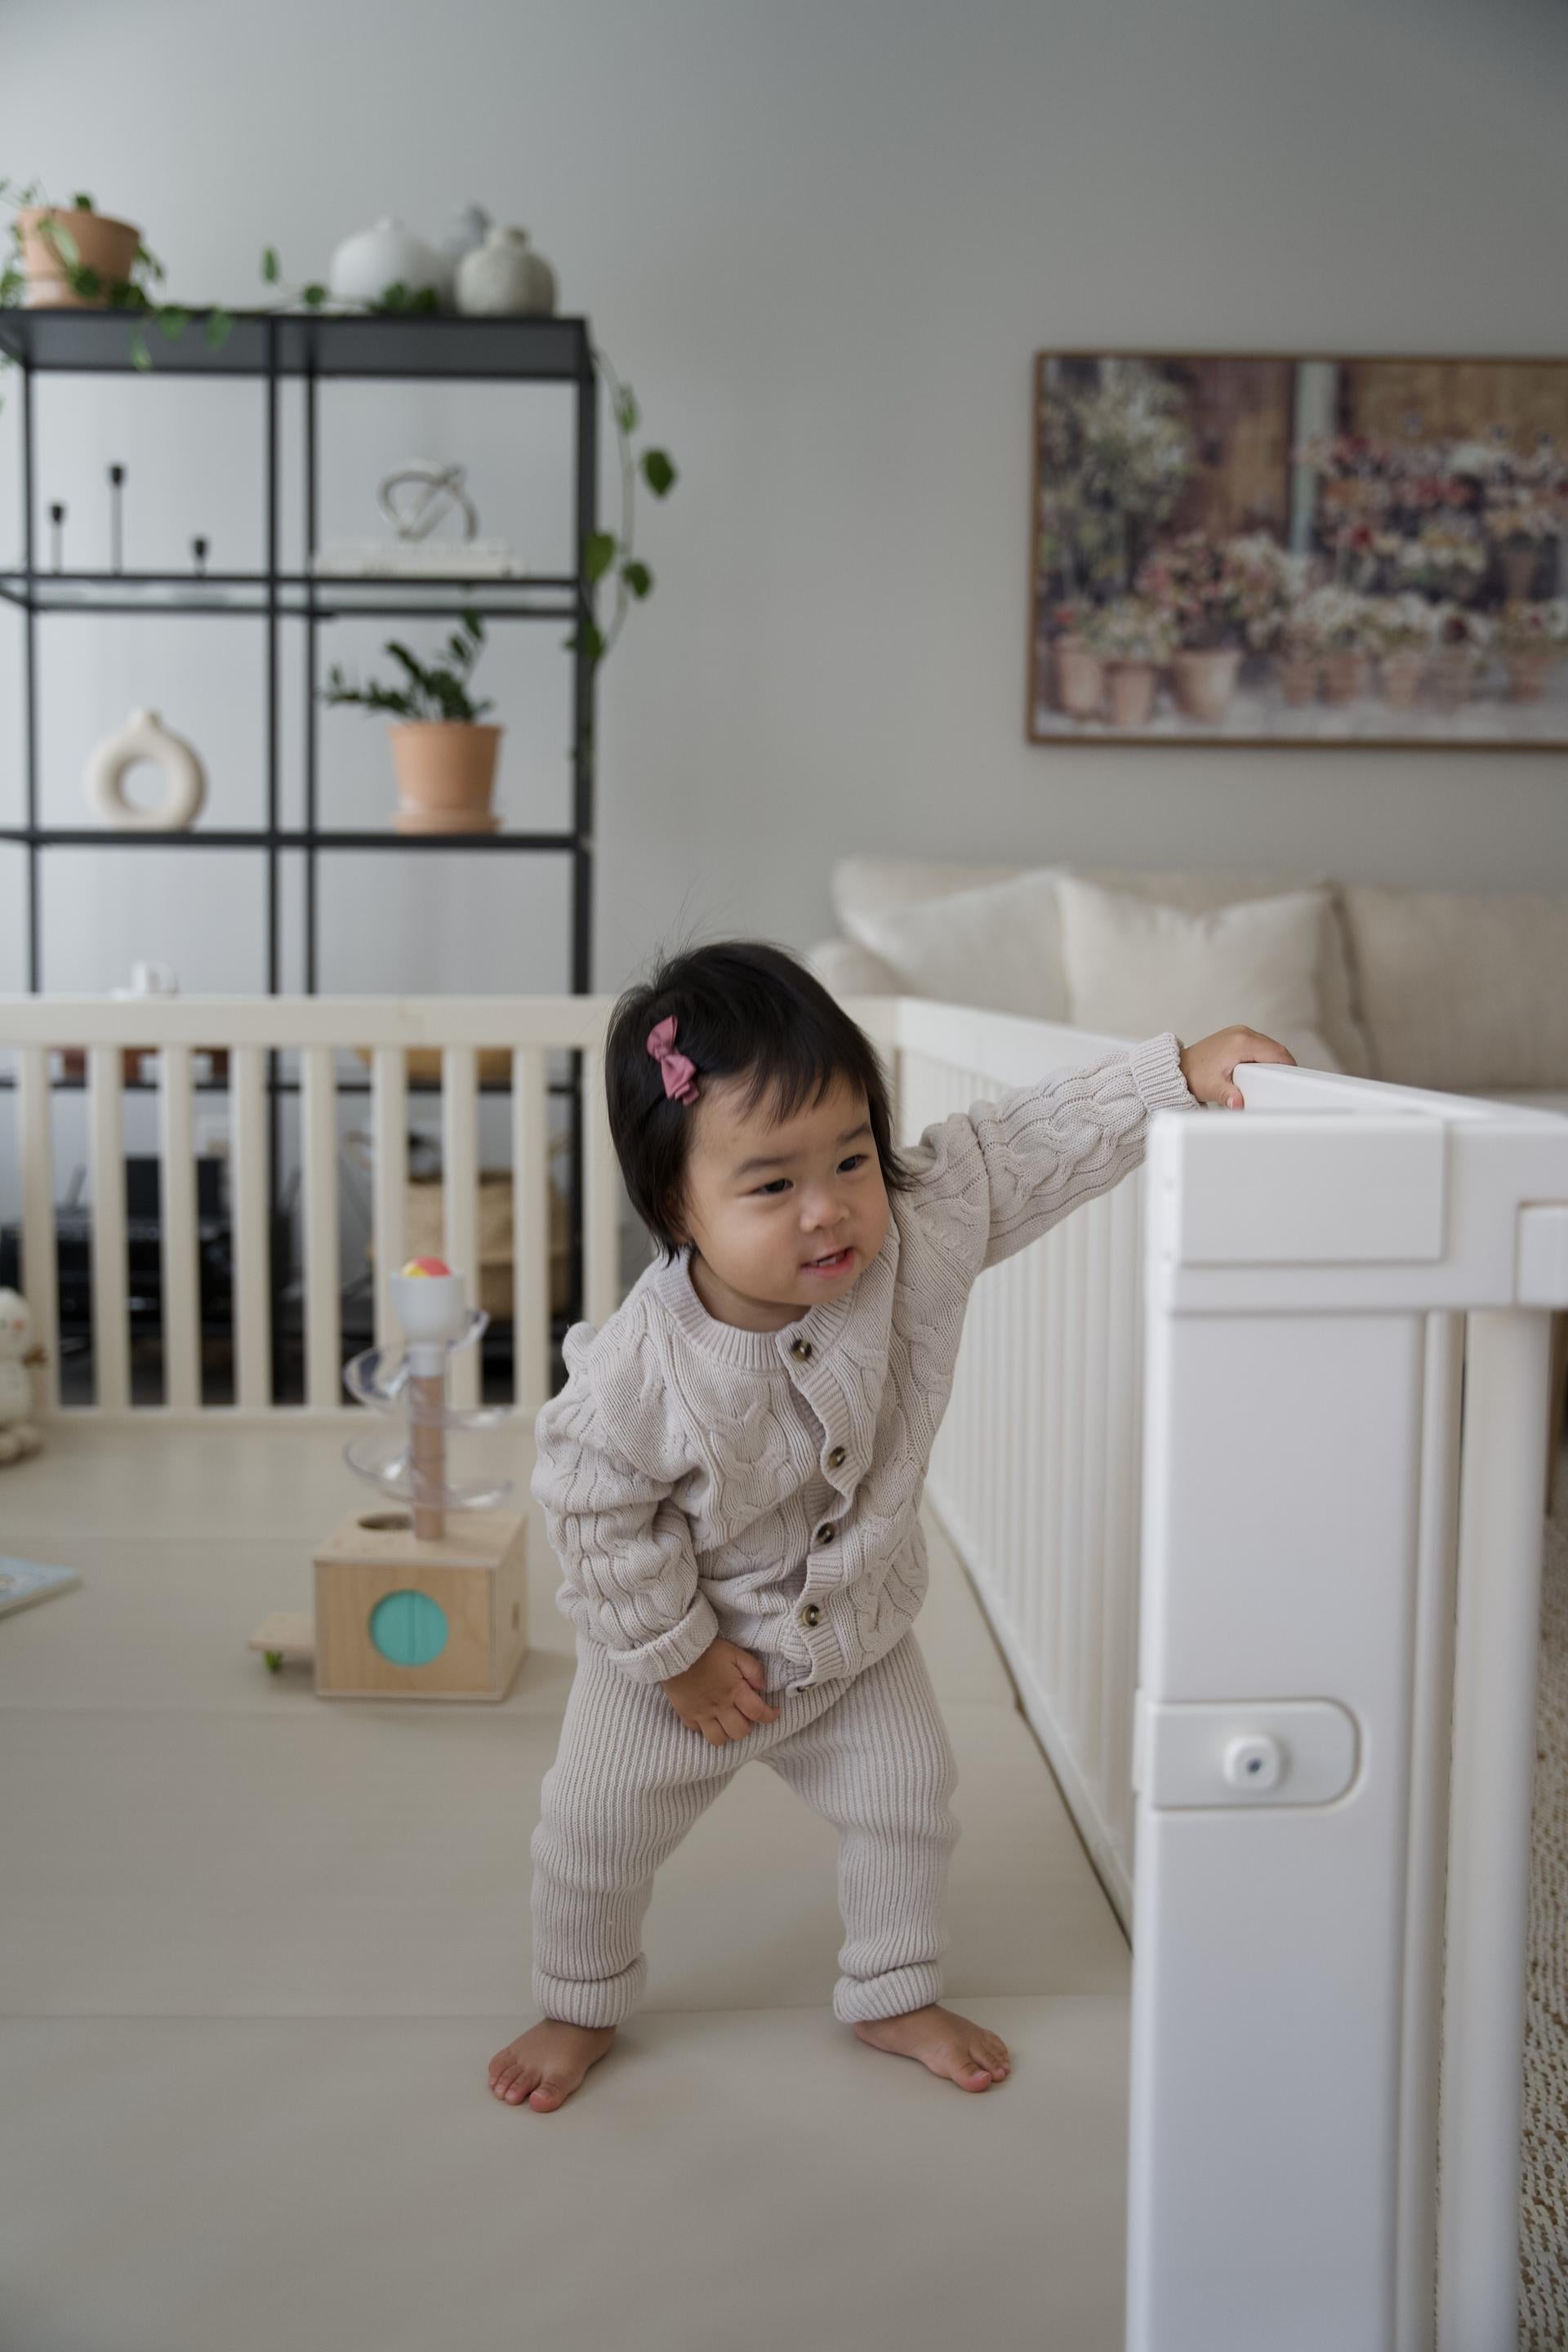 Your Guide to Baby Proofing: How to Baby Proof Your House